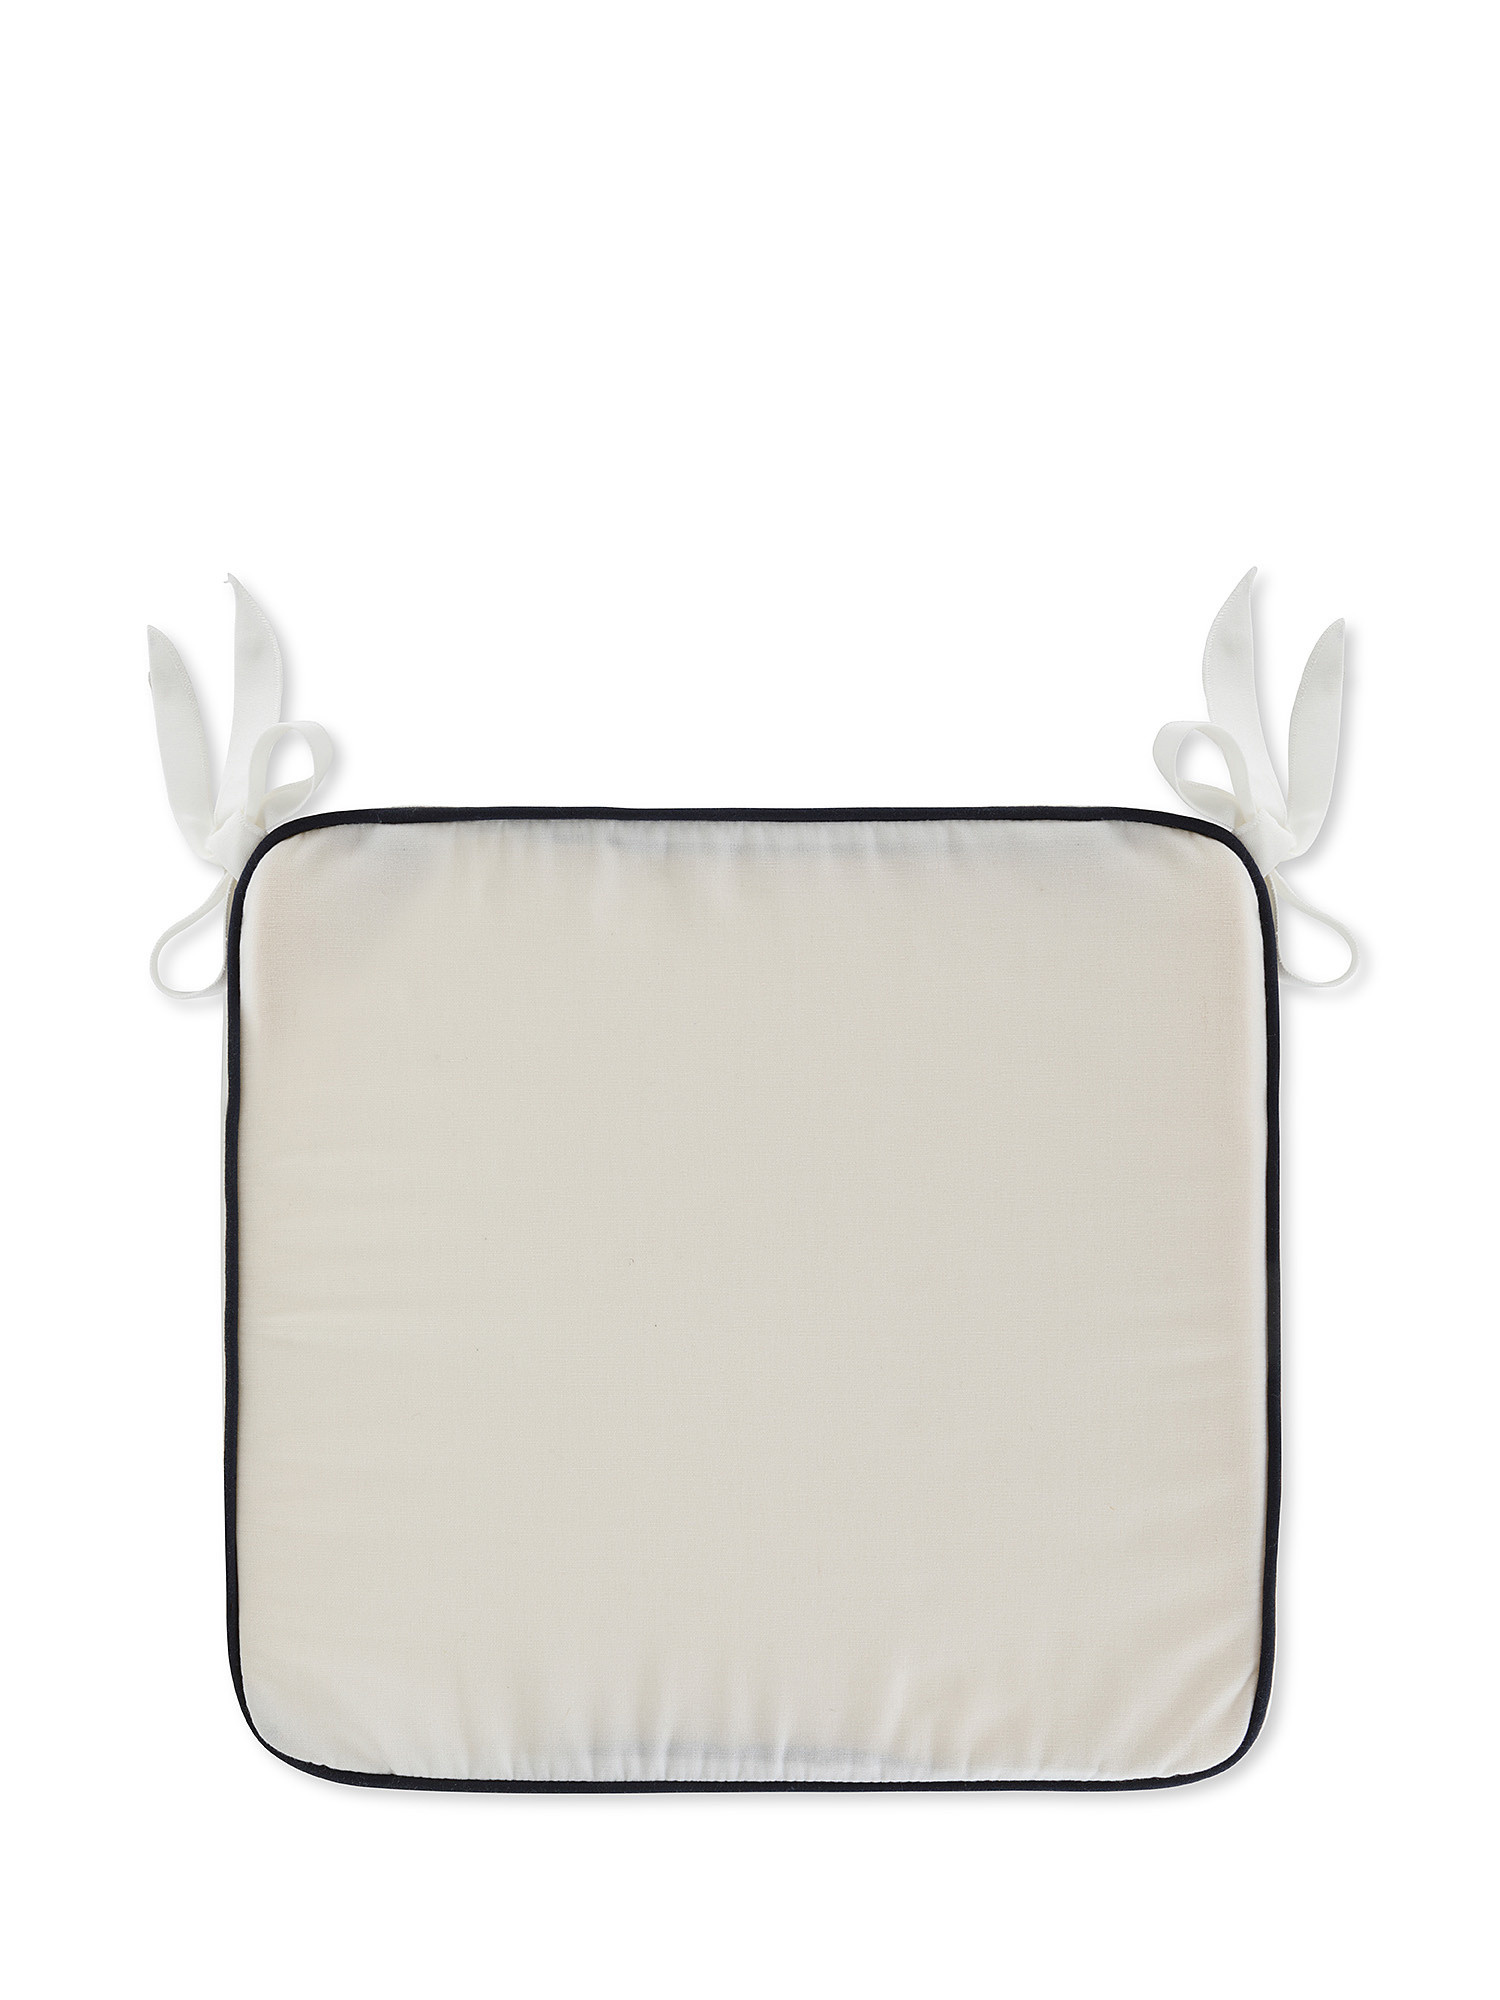 Outdoor cushion in Teflon 42x42cm, White, large image number 0